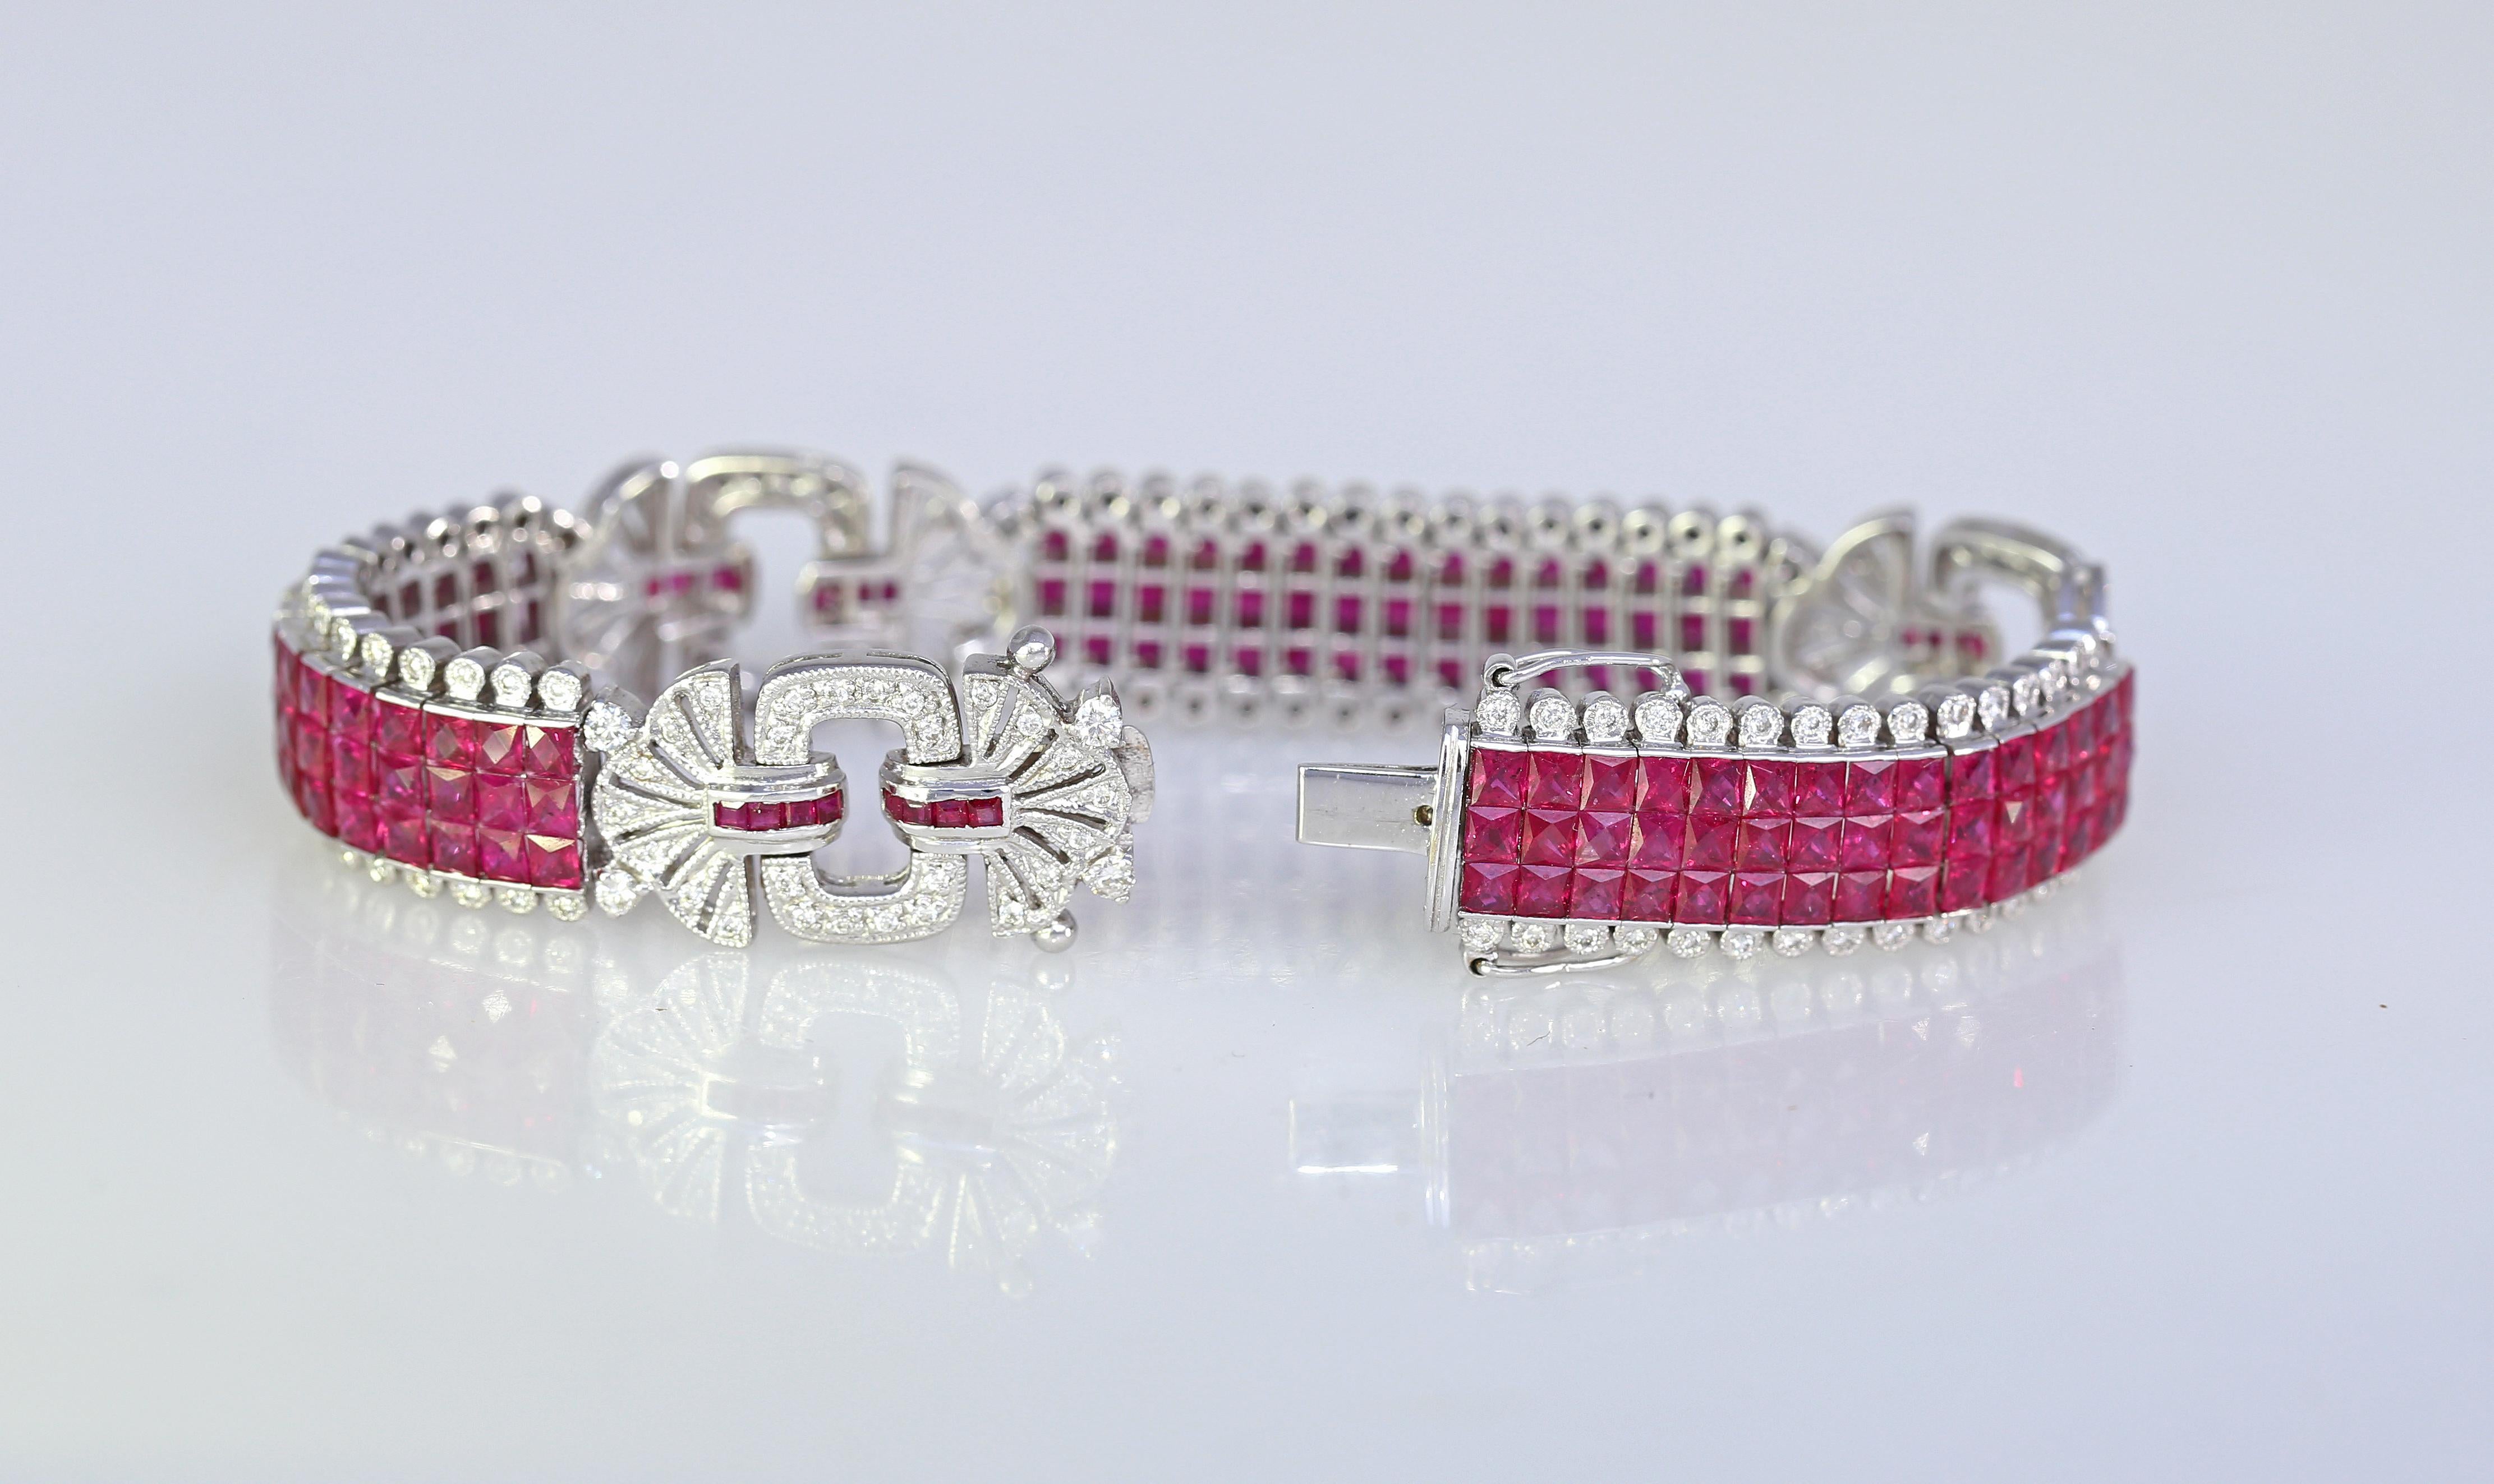 Rubies Diamonds Bracelet set Invisibly. Very high-quality Rubies of deep red color. Hand made in 2000.  The fine setting technique of rubies is totally invisible, each stone is neatly aligned to another to form a uniform red line, and yet the